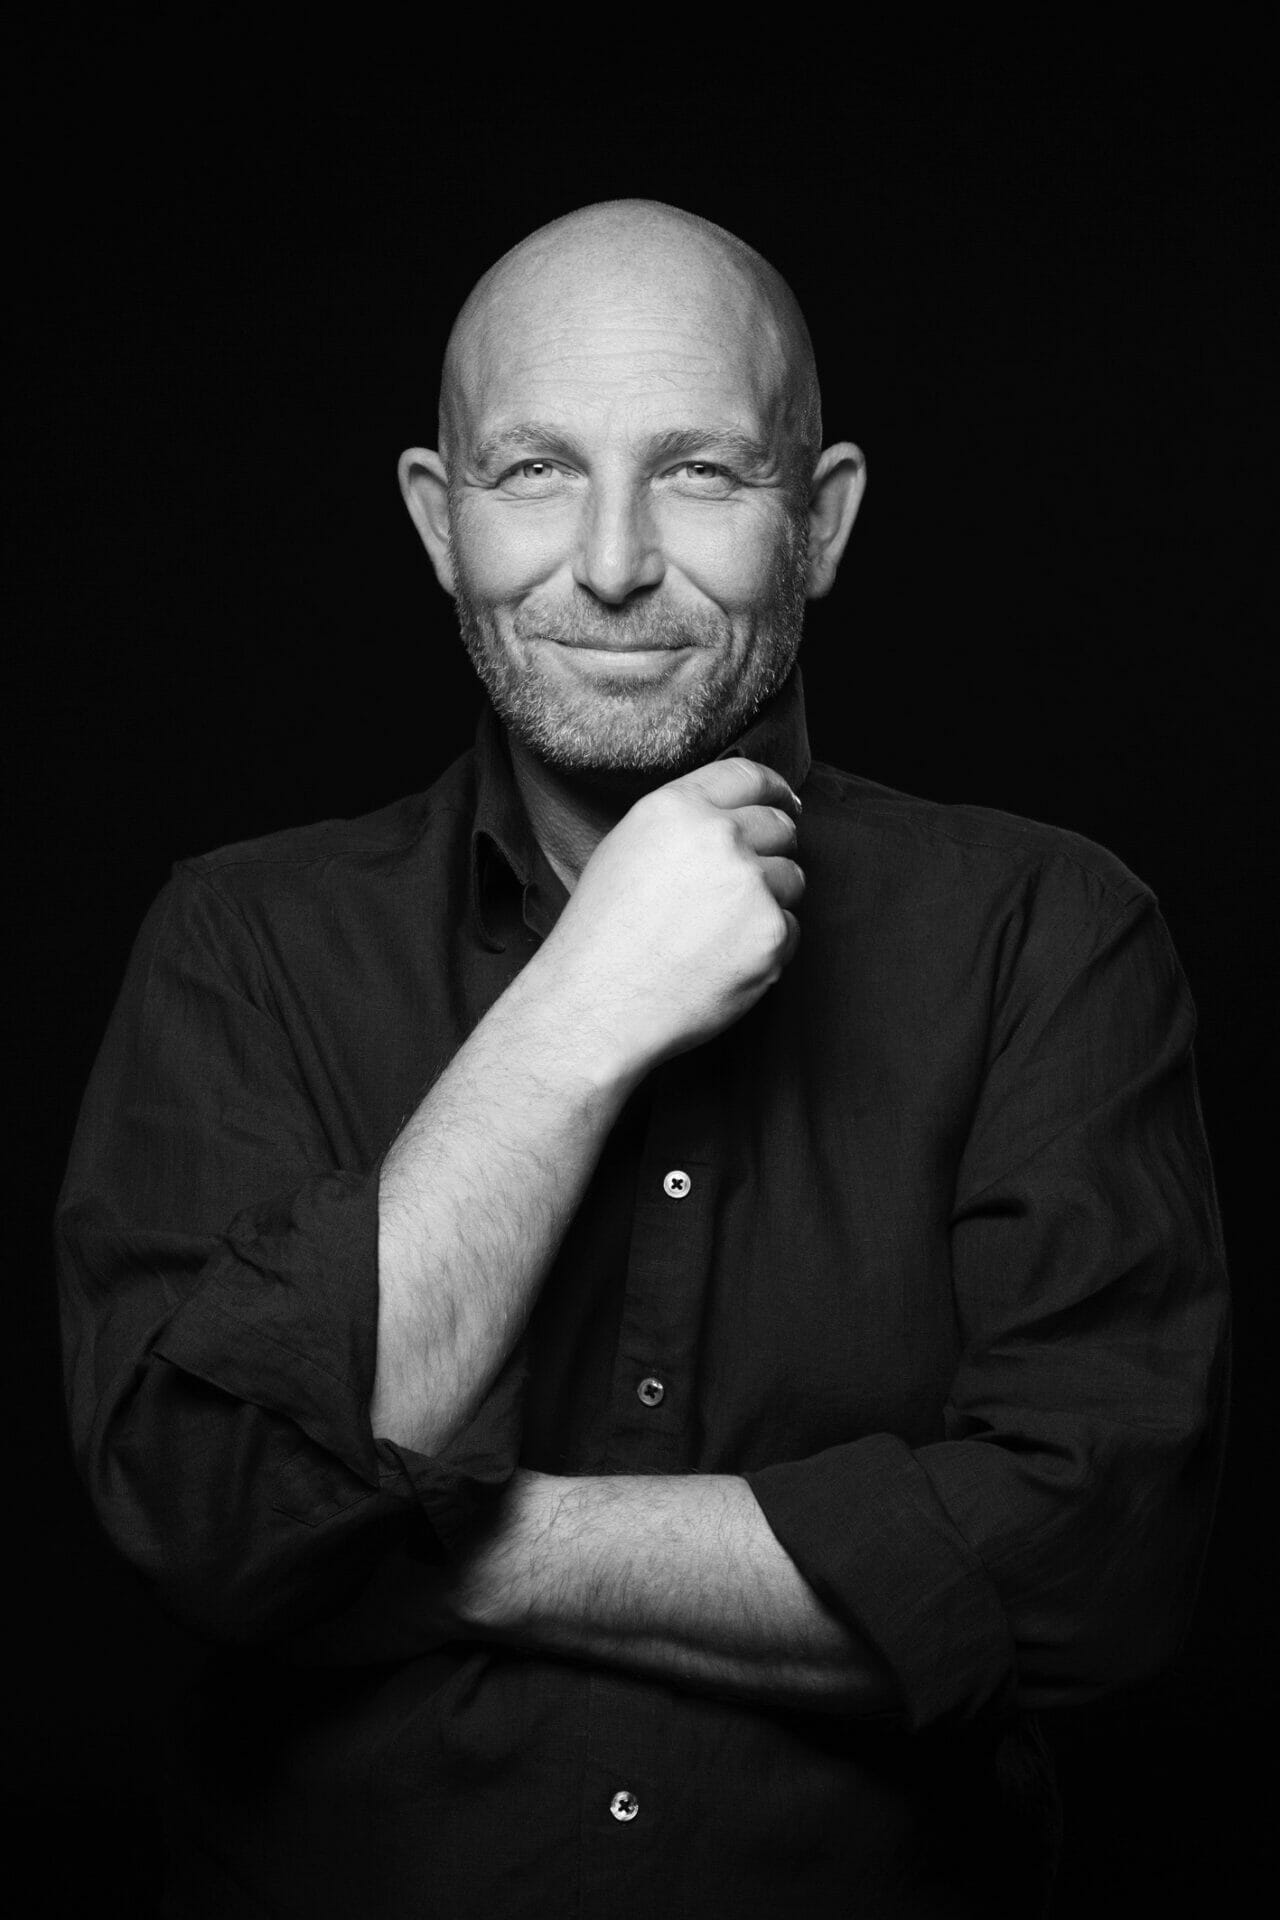 Mads Munk, CEO and Founder M2 Animation, black and white photo against a black backdrop